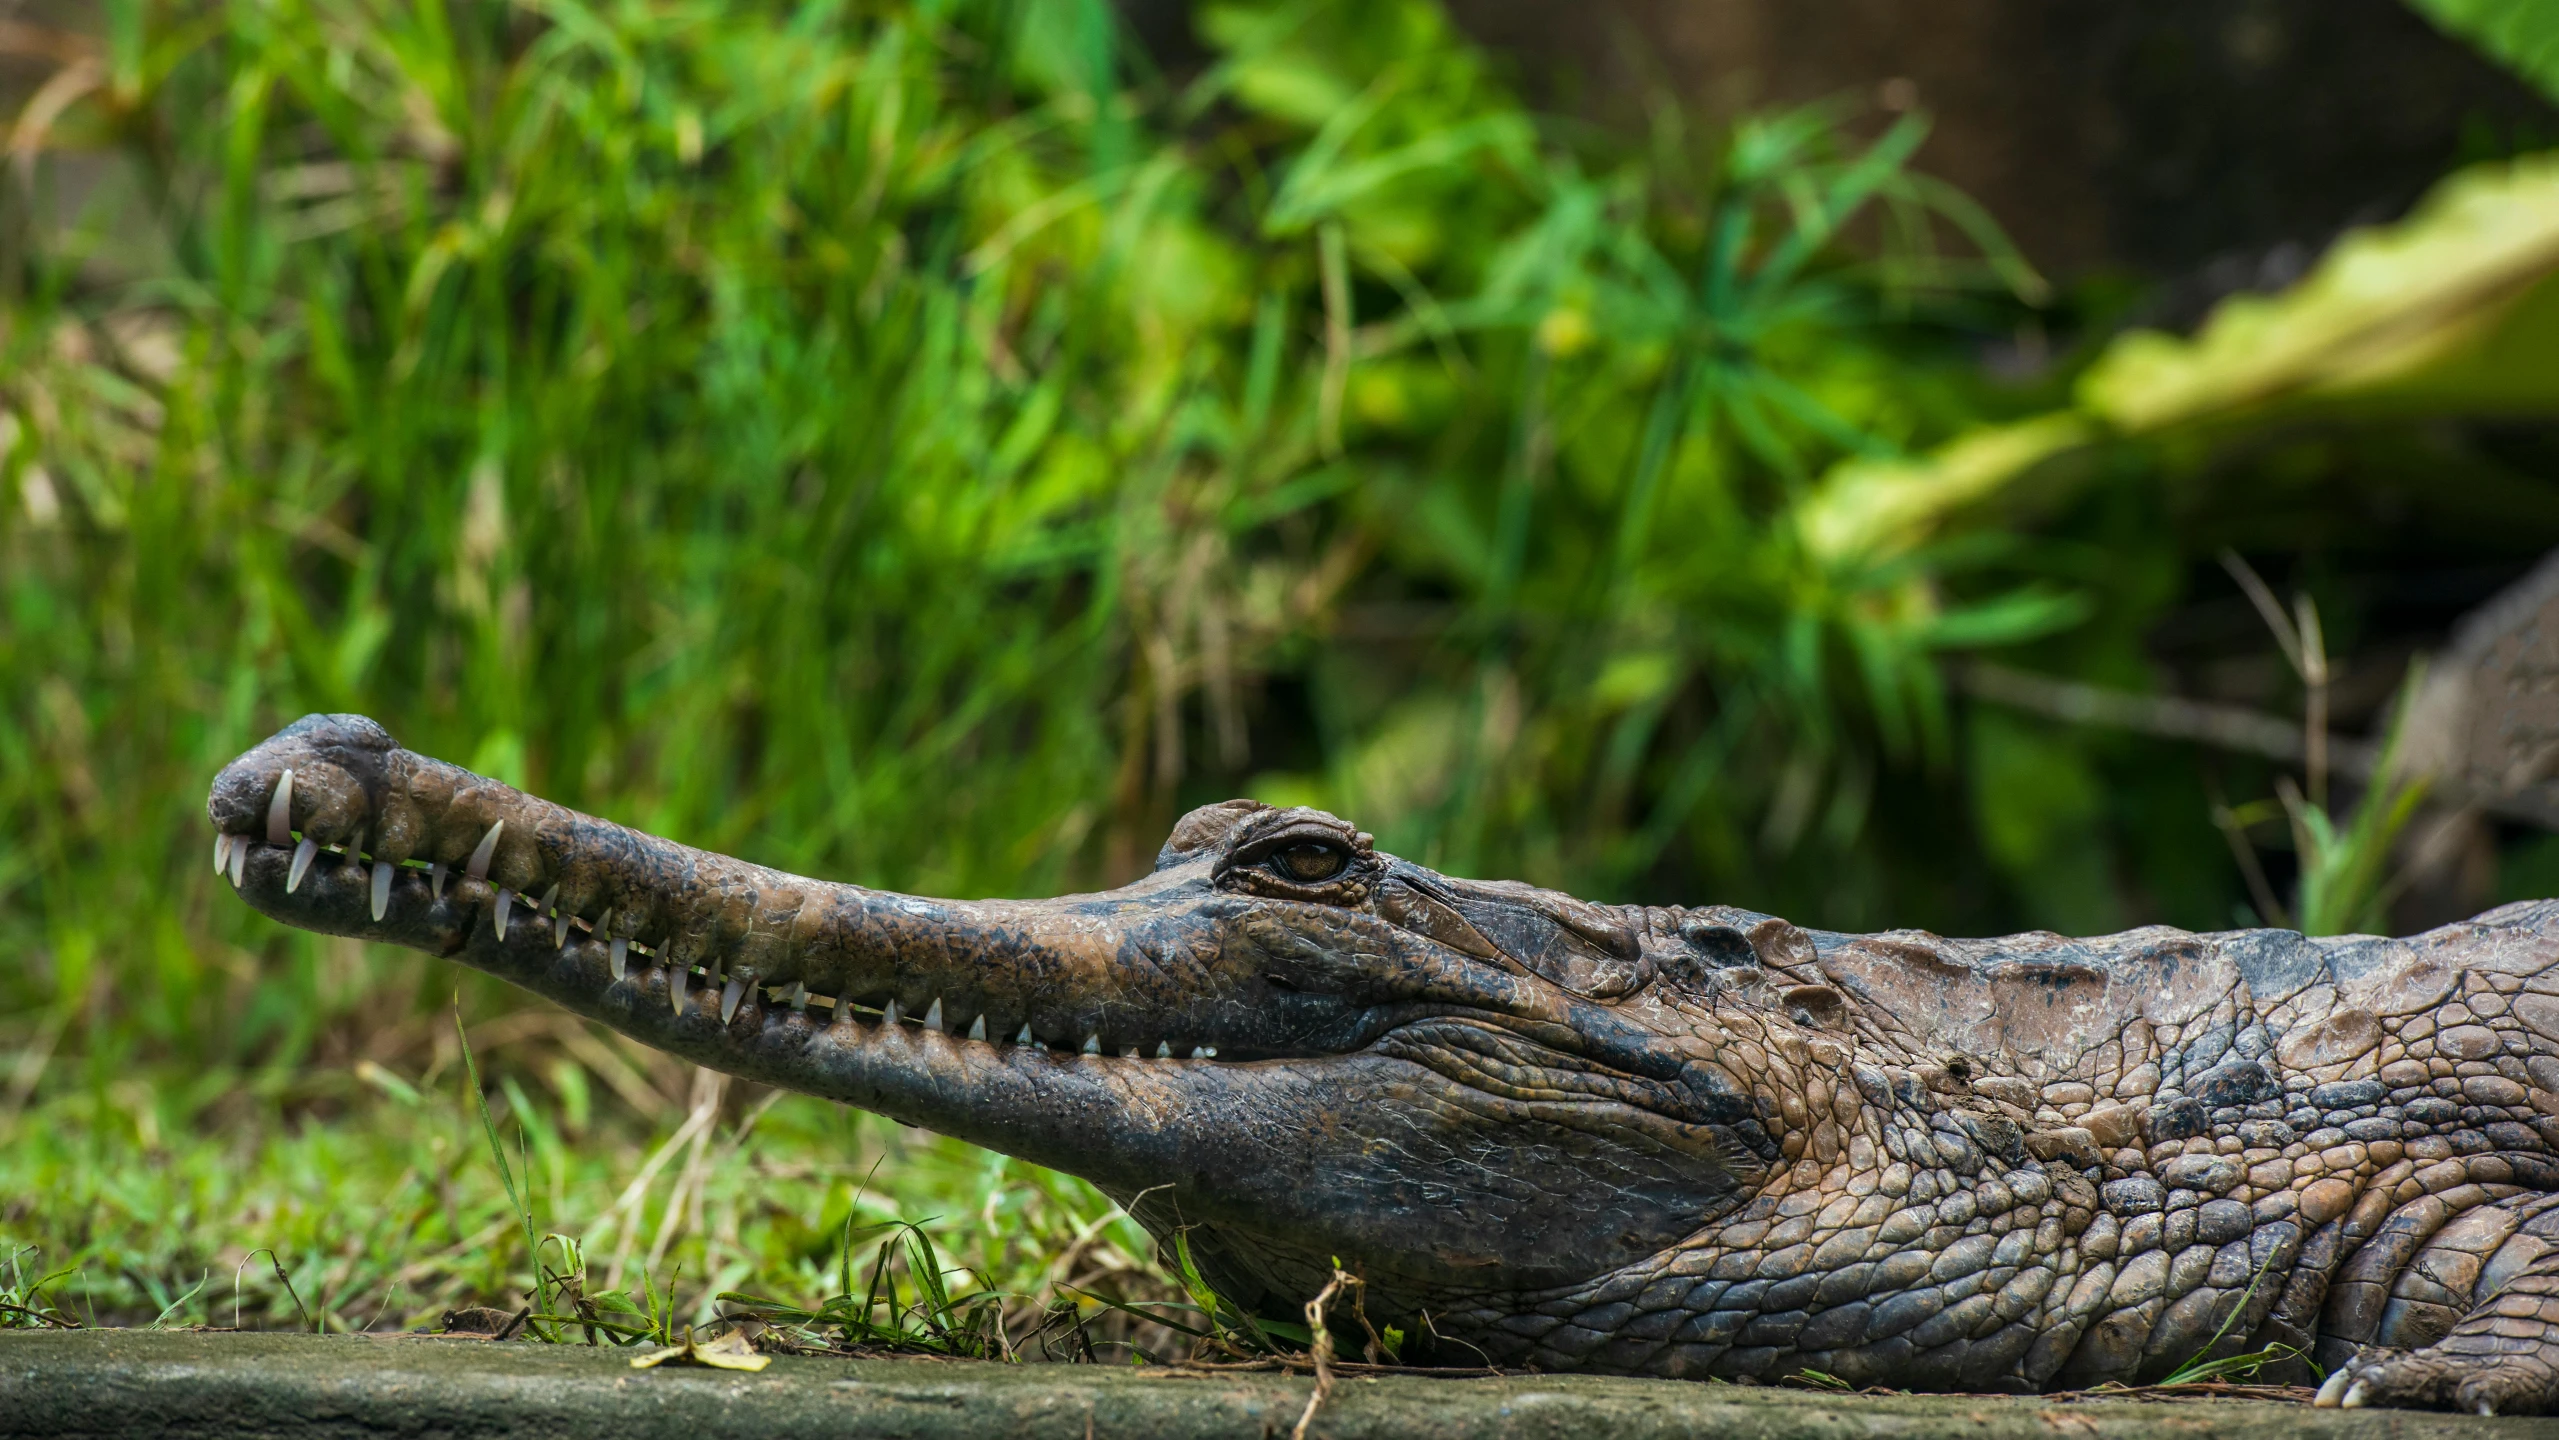 a close up of the head of a large alligator